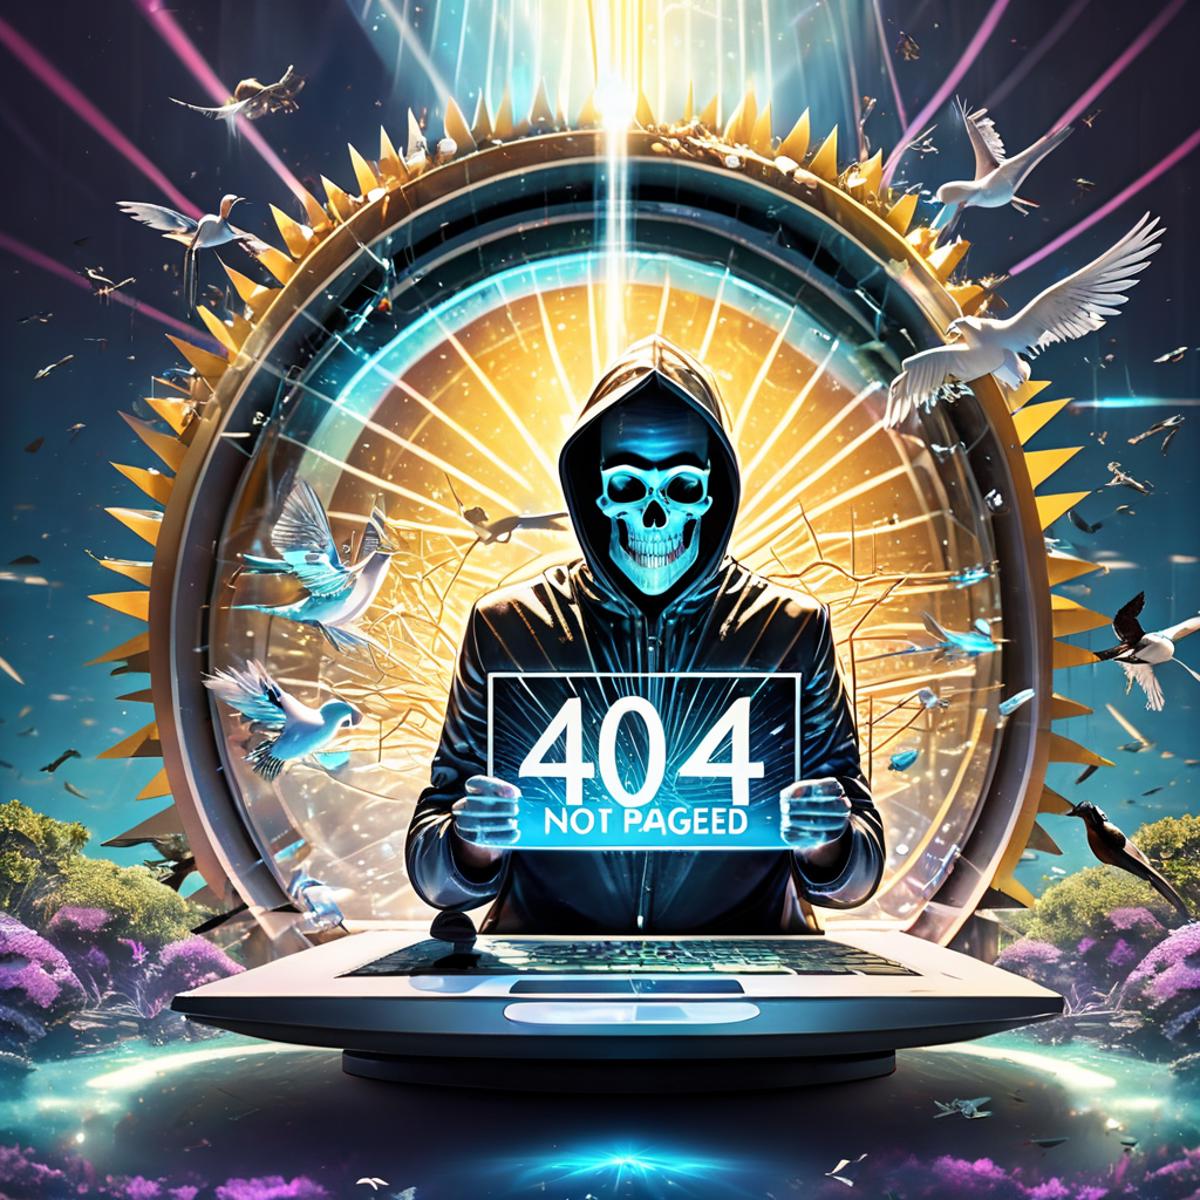 A 404 error image featuring a person in a hoodie holding a sign with a skull and crossbones.